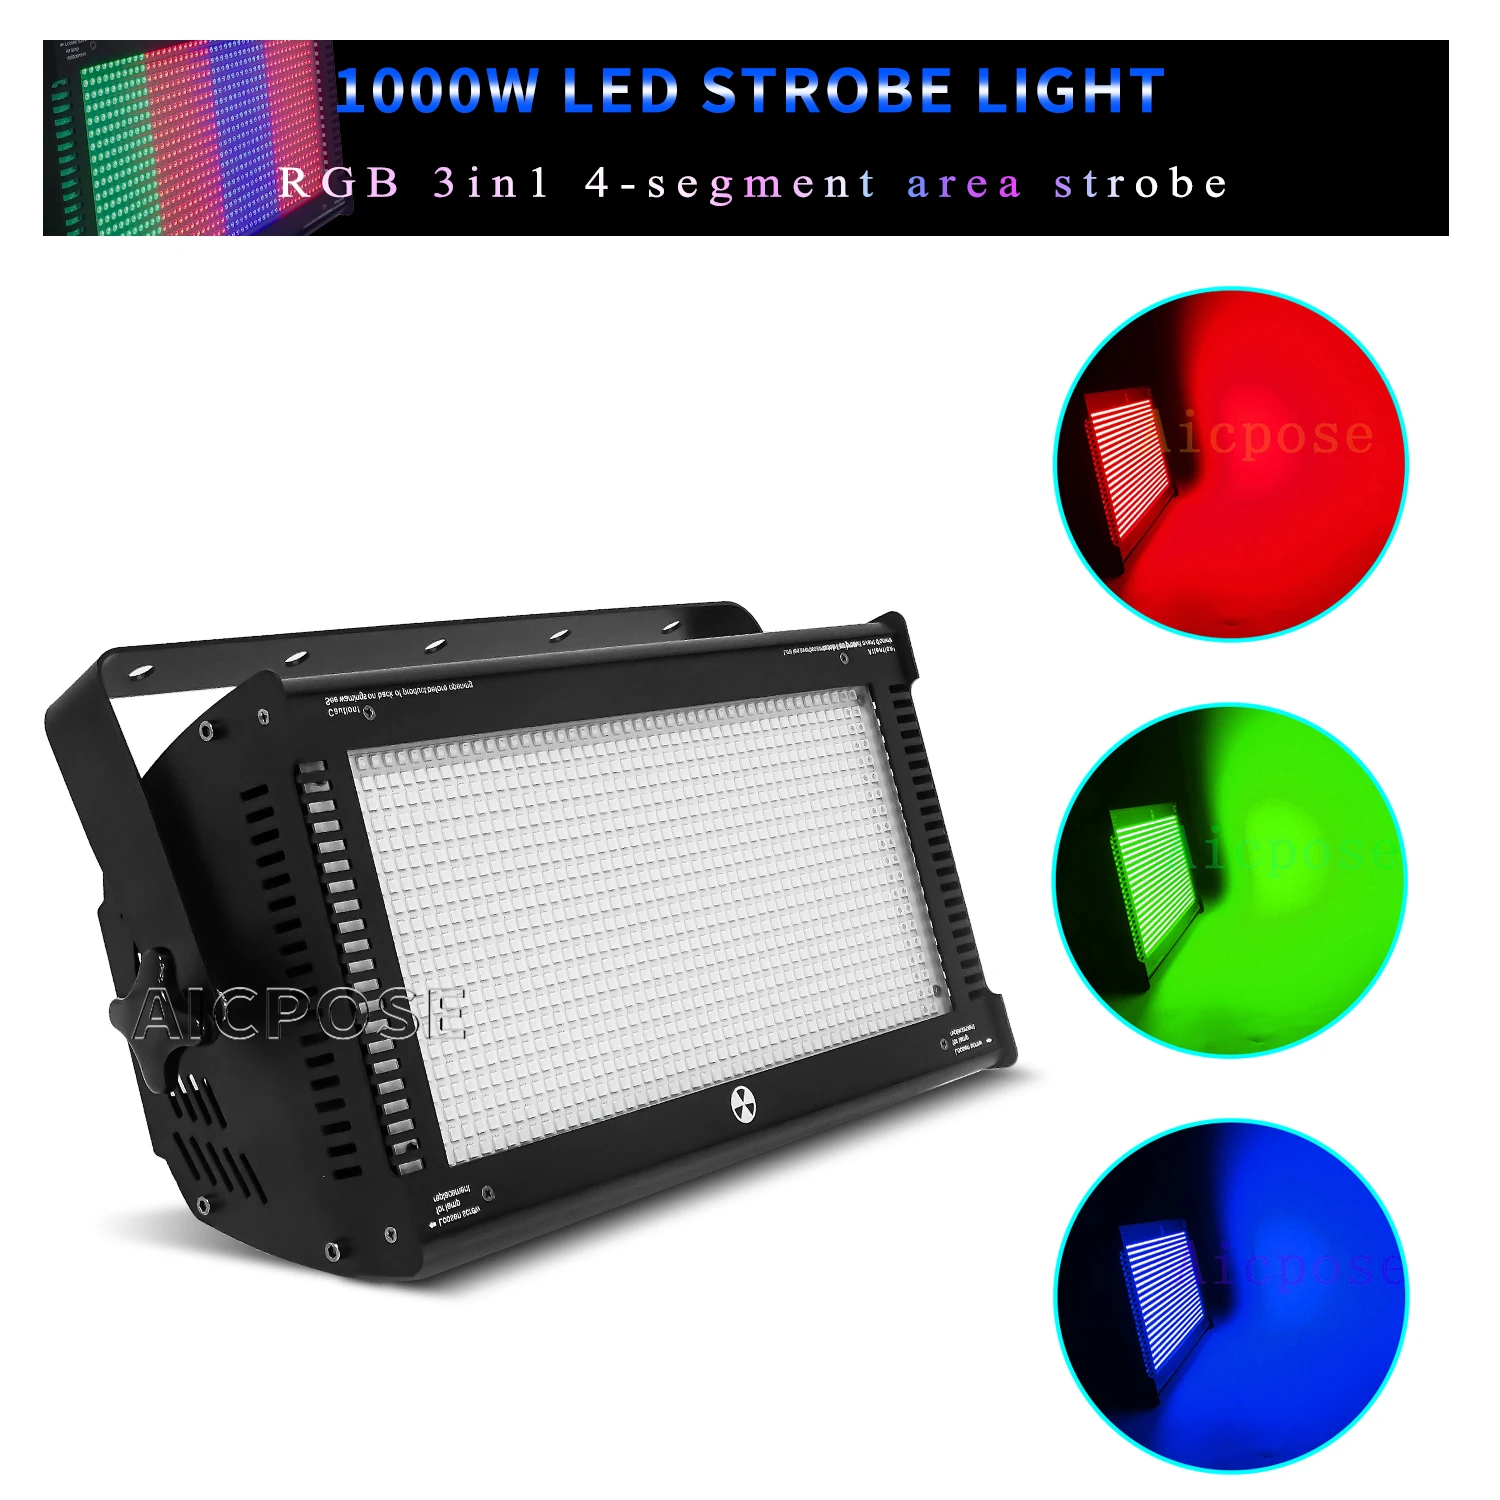 

1000W RGB 3 in 1 LED Stage Strobe Light DMX512 Control Professional DJ Disco Equipment Bar Party Stage Lighting Effects